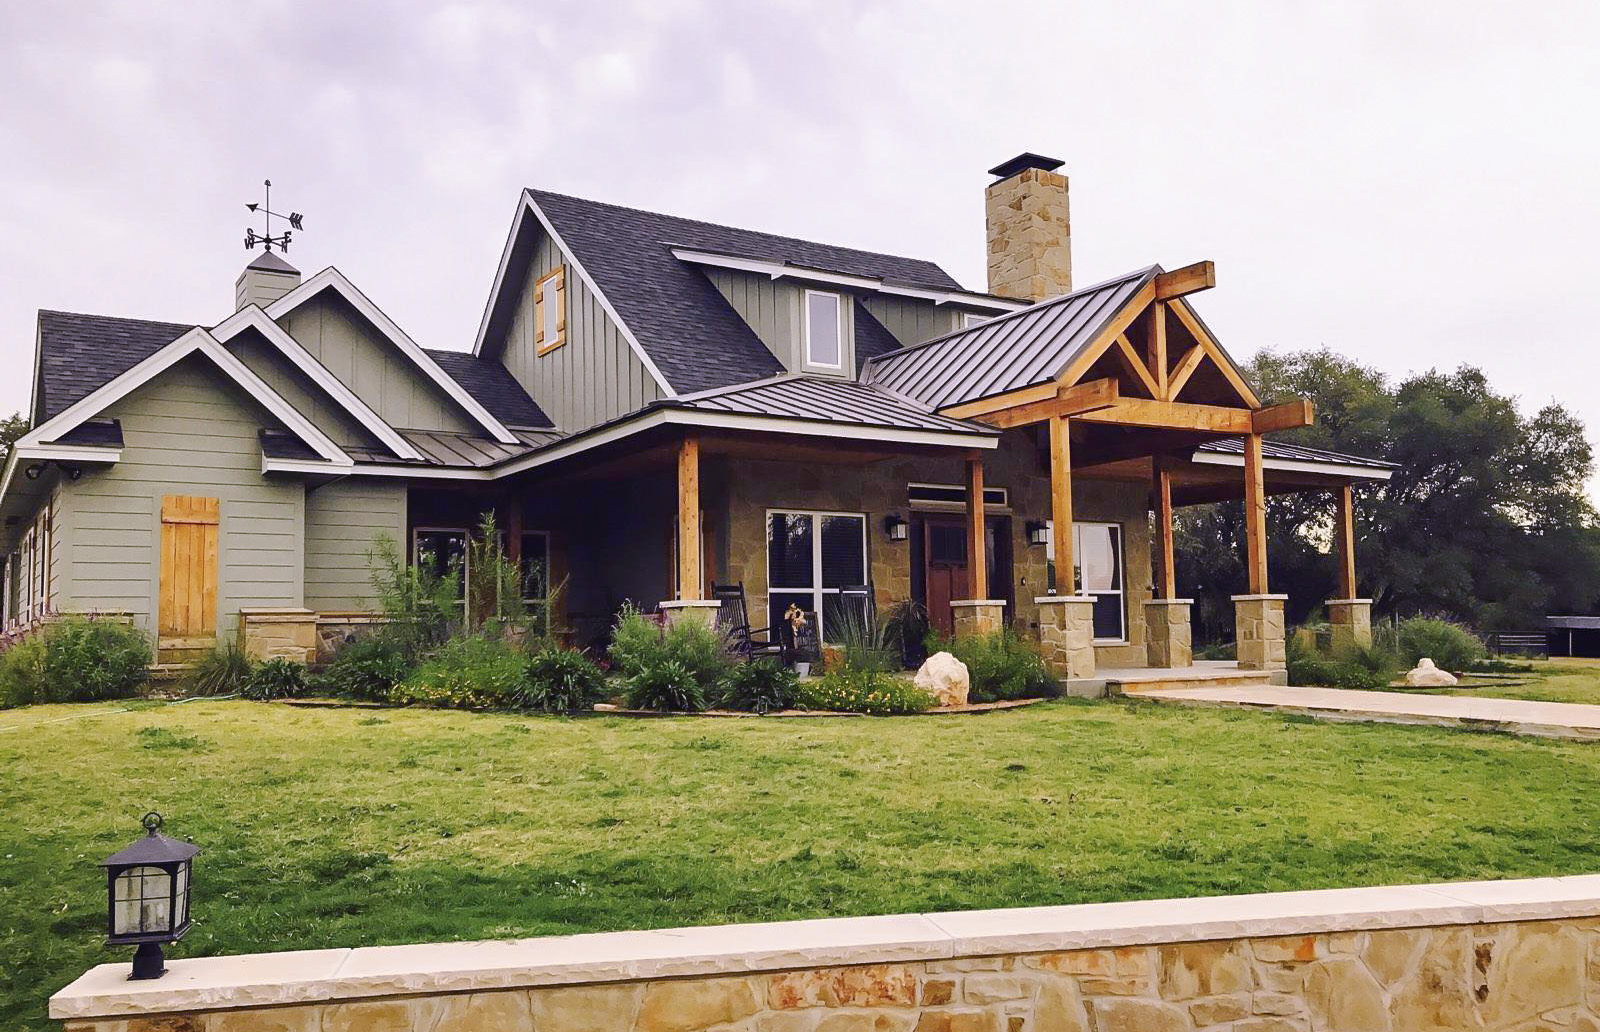 Builders Merchant in Central Texas | Sample Image of a House